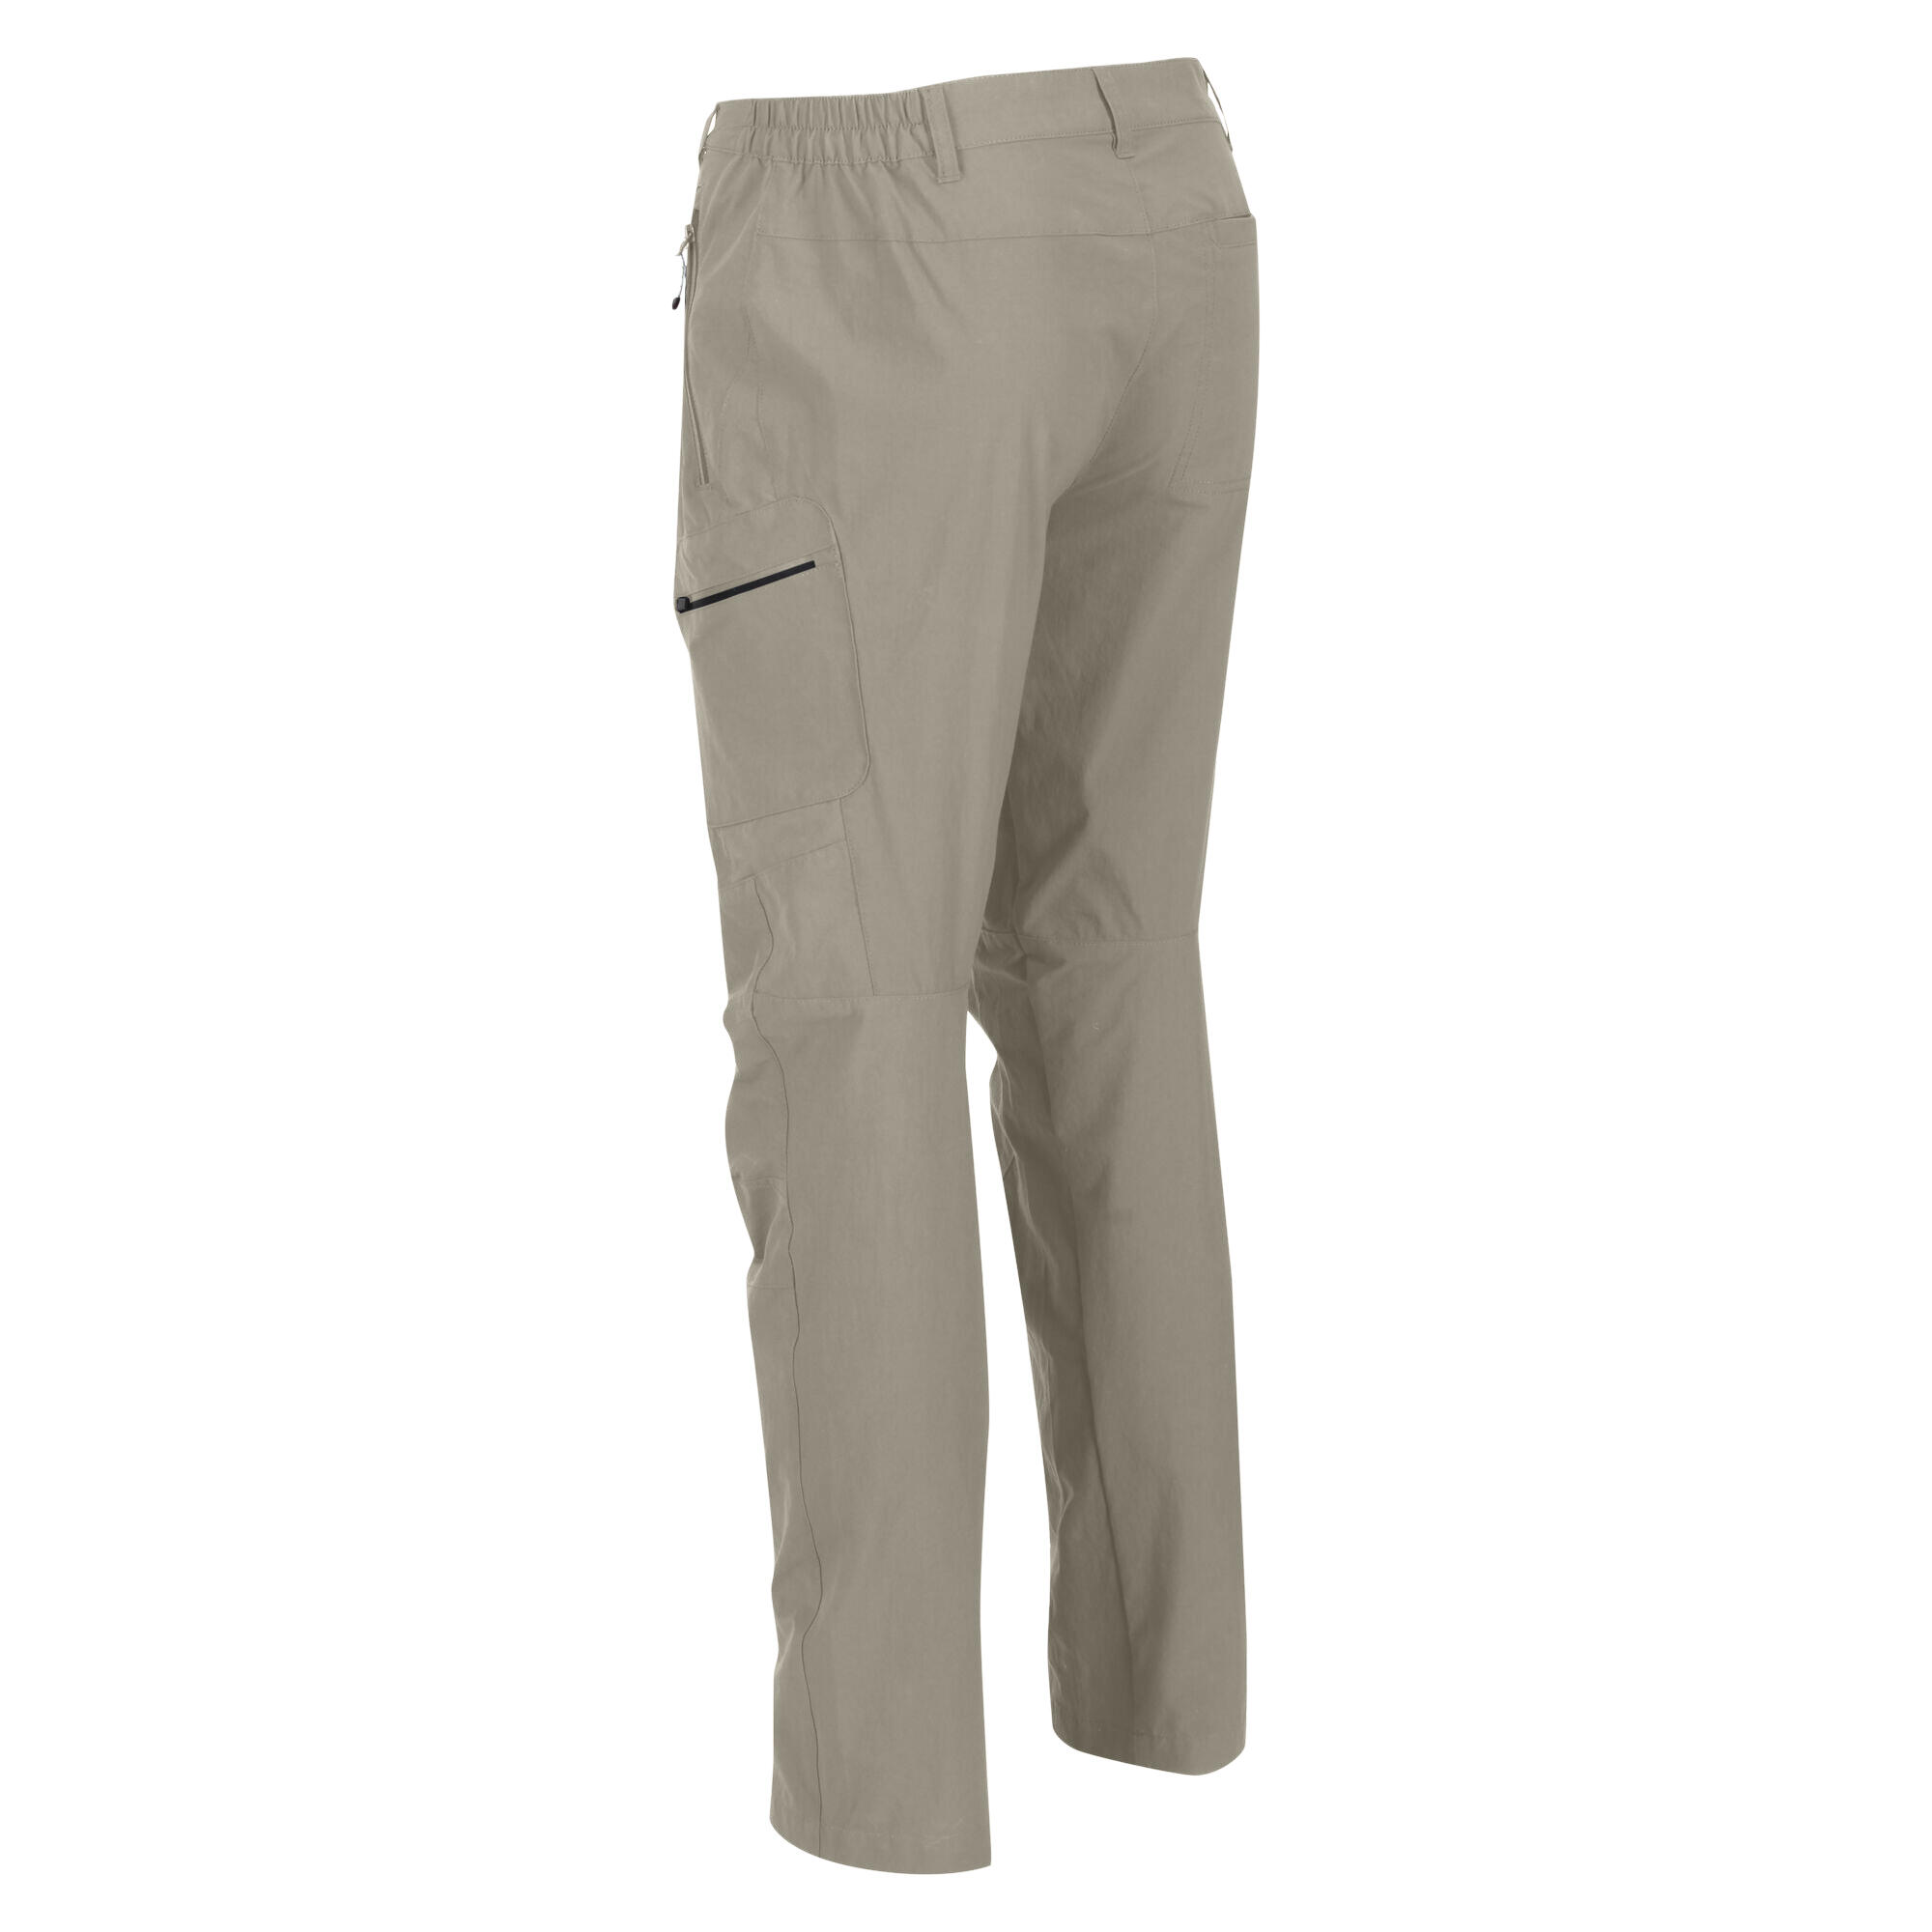 Mens Highton Hiking Trousers (Parchment) 4/5